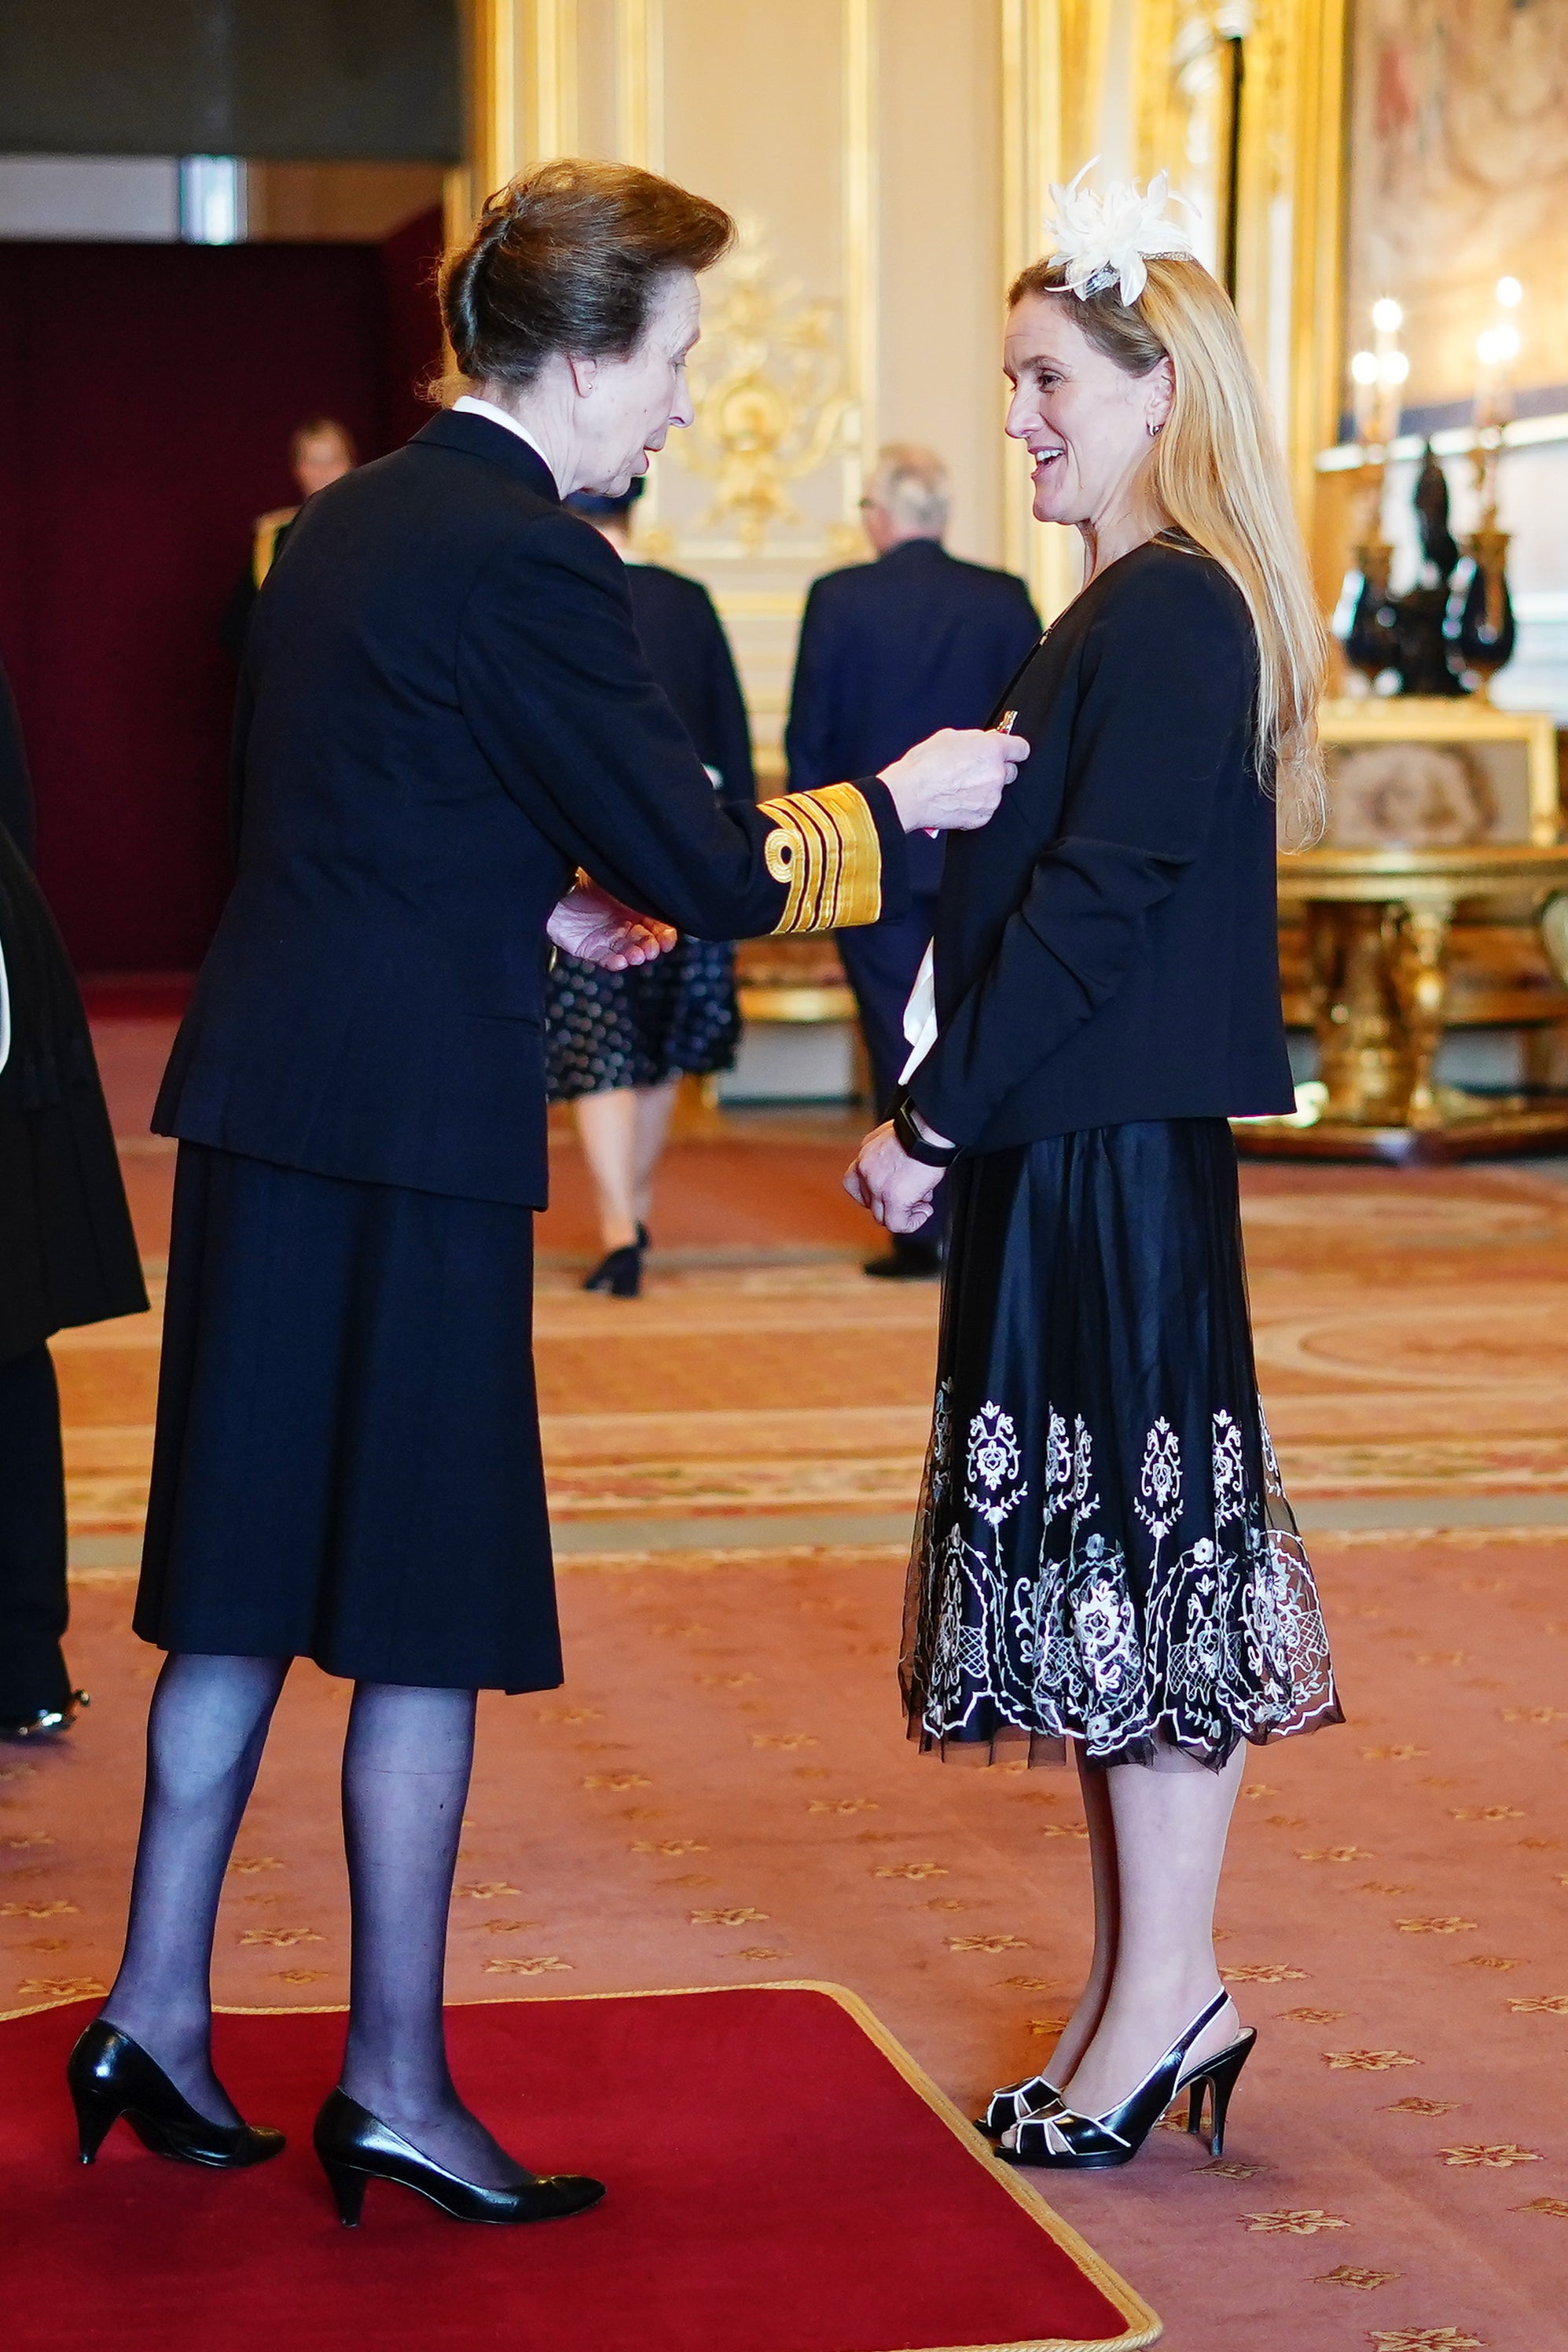 Kim Leadbeater MP received her MBE medal from the Princess Royal (Aaron Chown/PA)